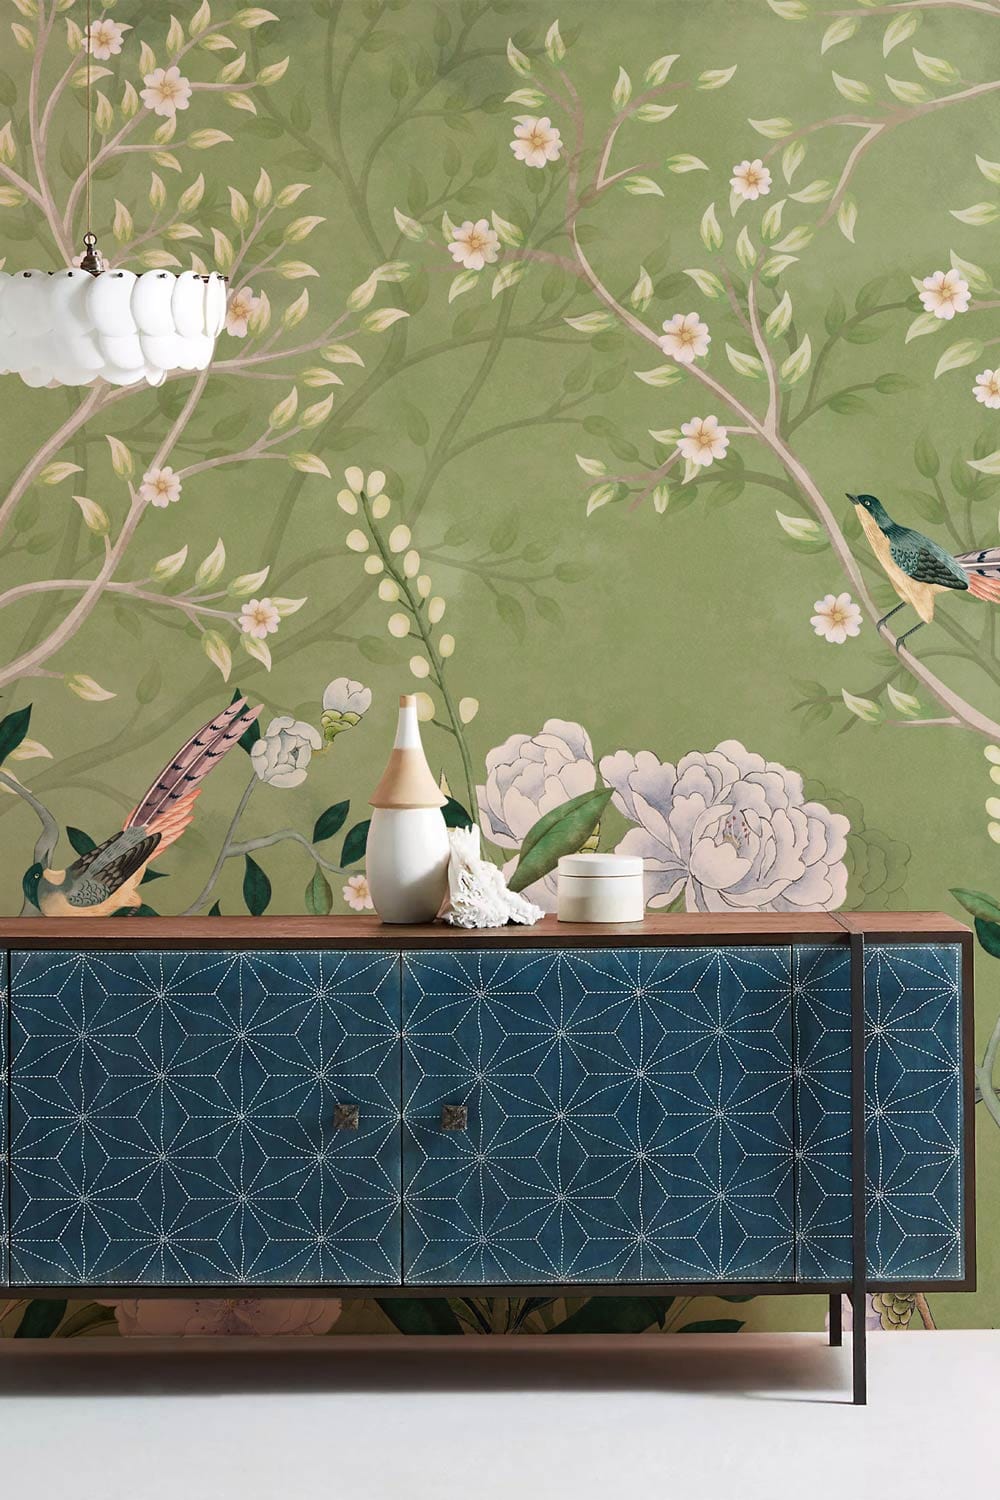 little white flowers and large blossoms with birds in the hallway wall paintings